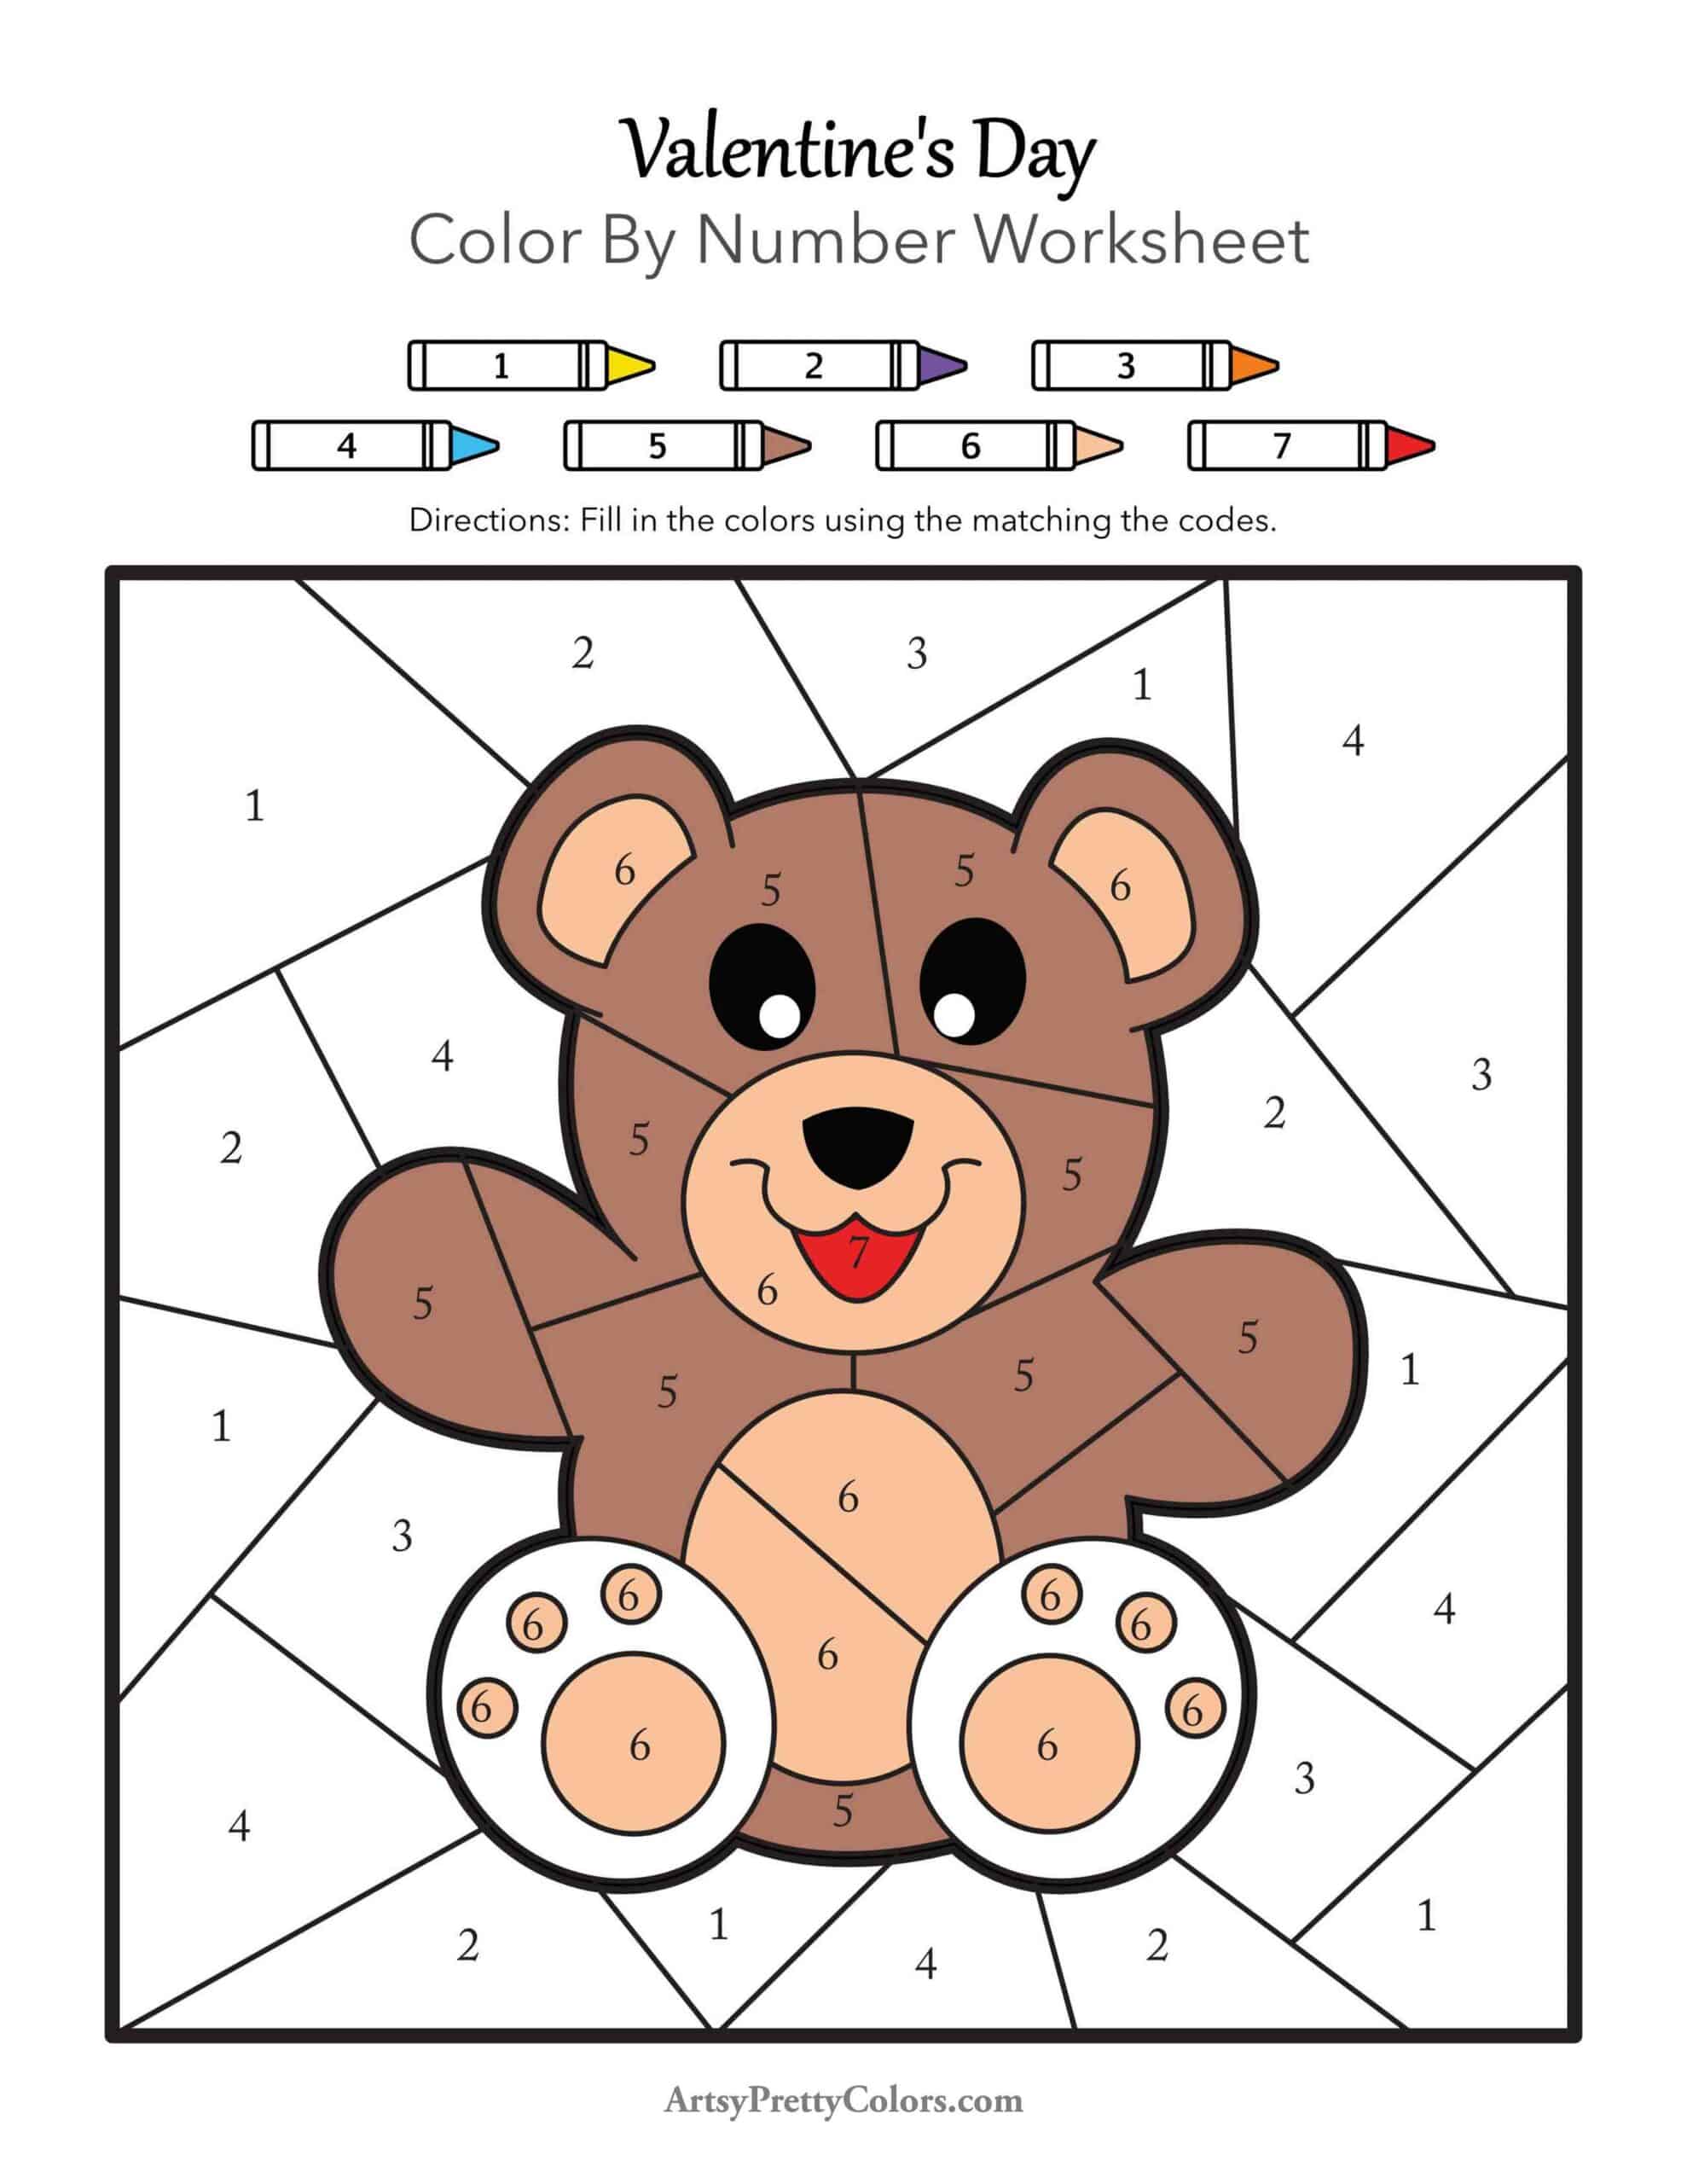 a cute teddy bear coloring page drawing. The bear is colored in and there are section lines filled with number codes.